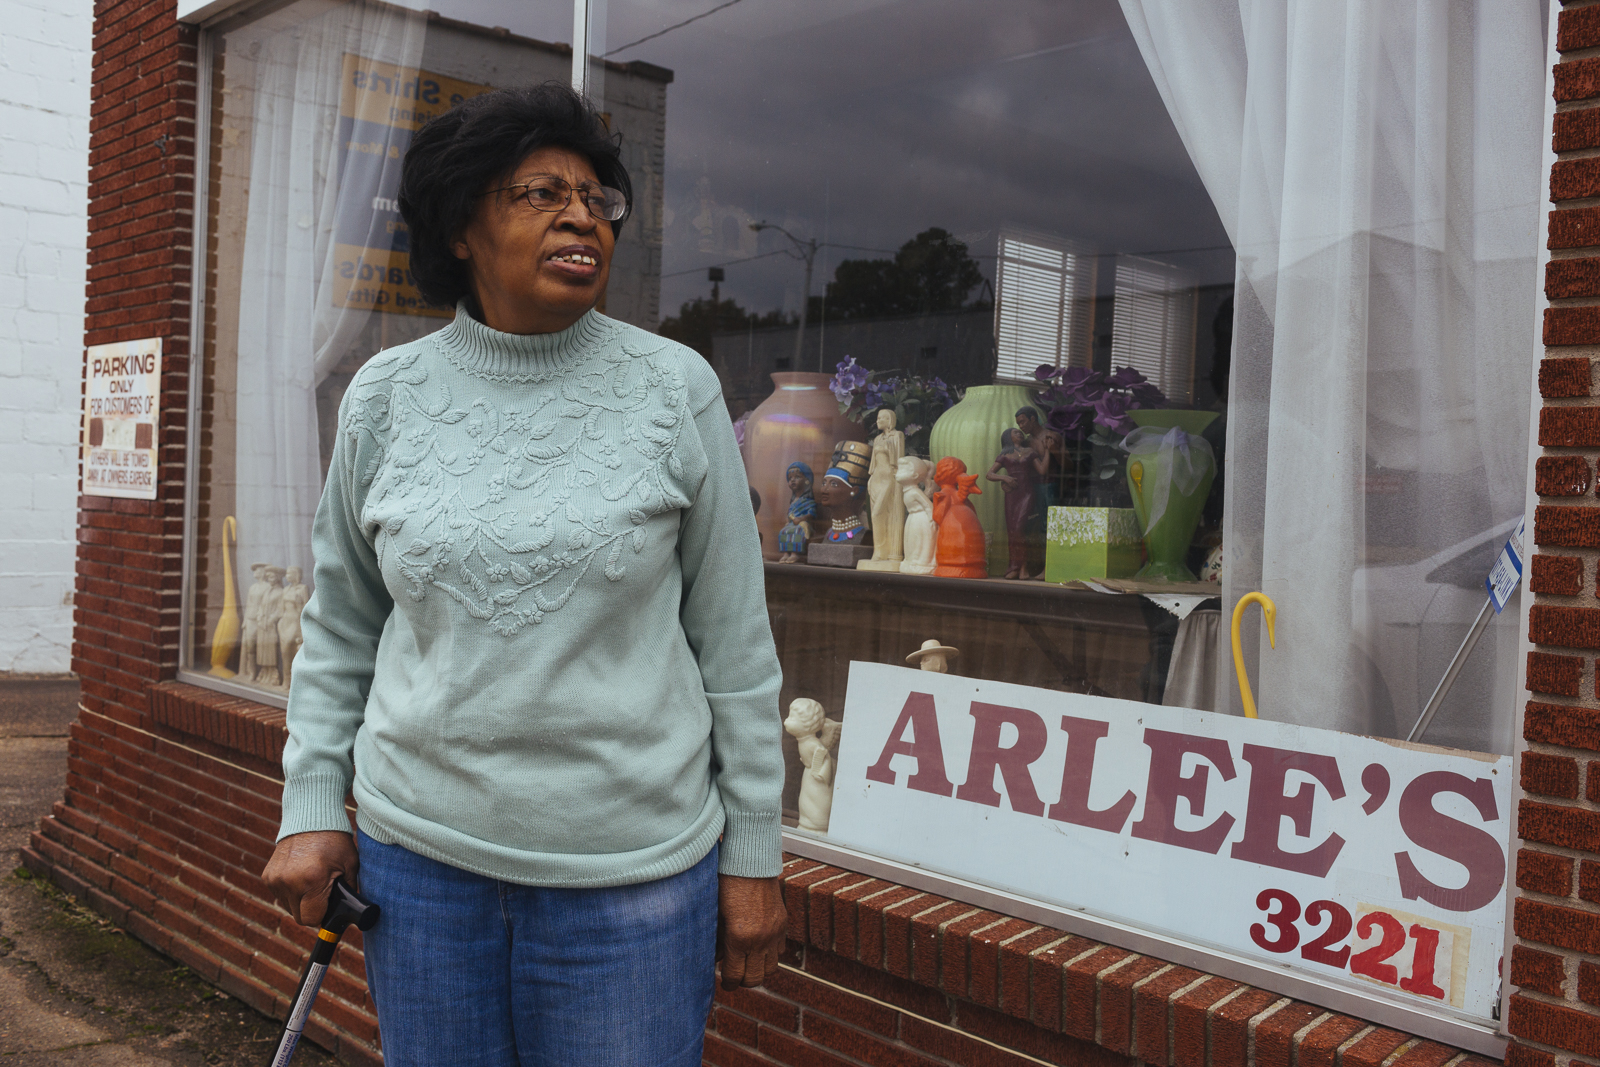 Arlee Applewhite opened Arlee's Ceramic Center in 2000, but almost 20 years later, she's struggling to find young people still interested in the craft. (Ziggy Mack)